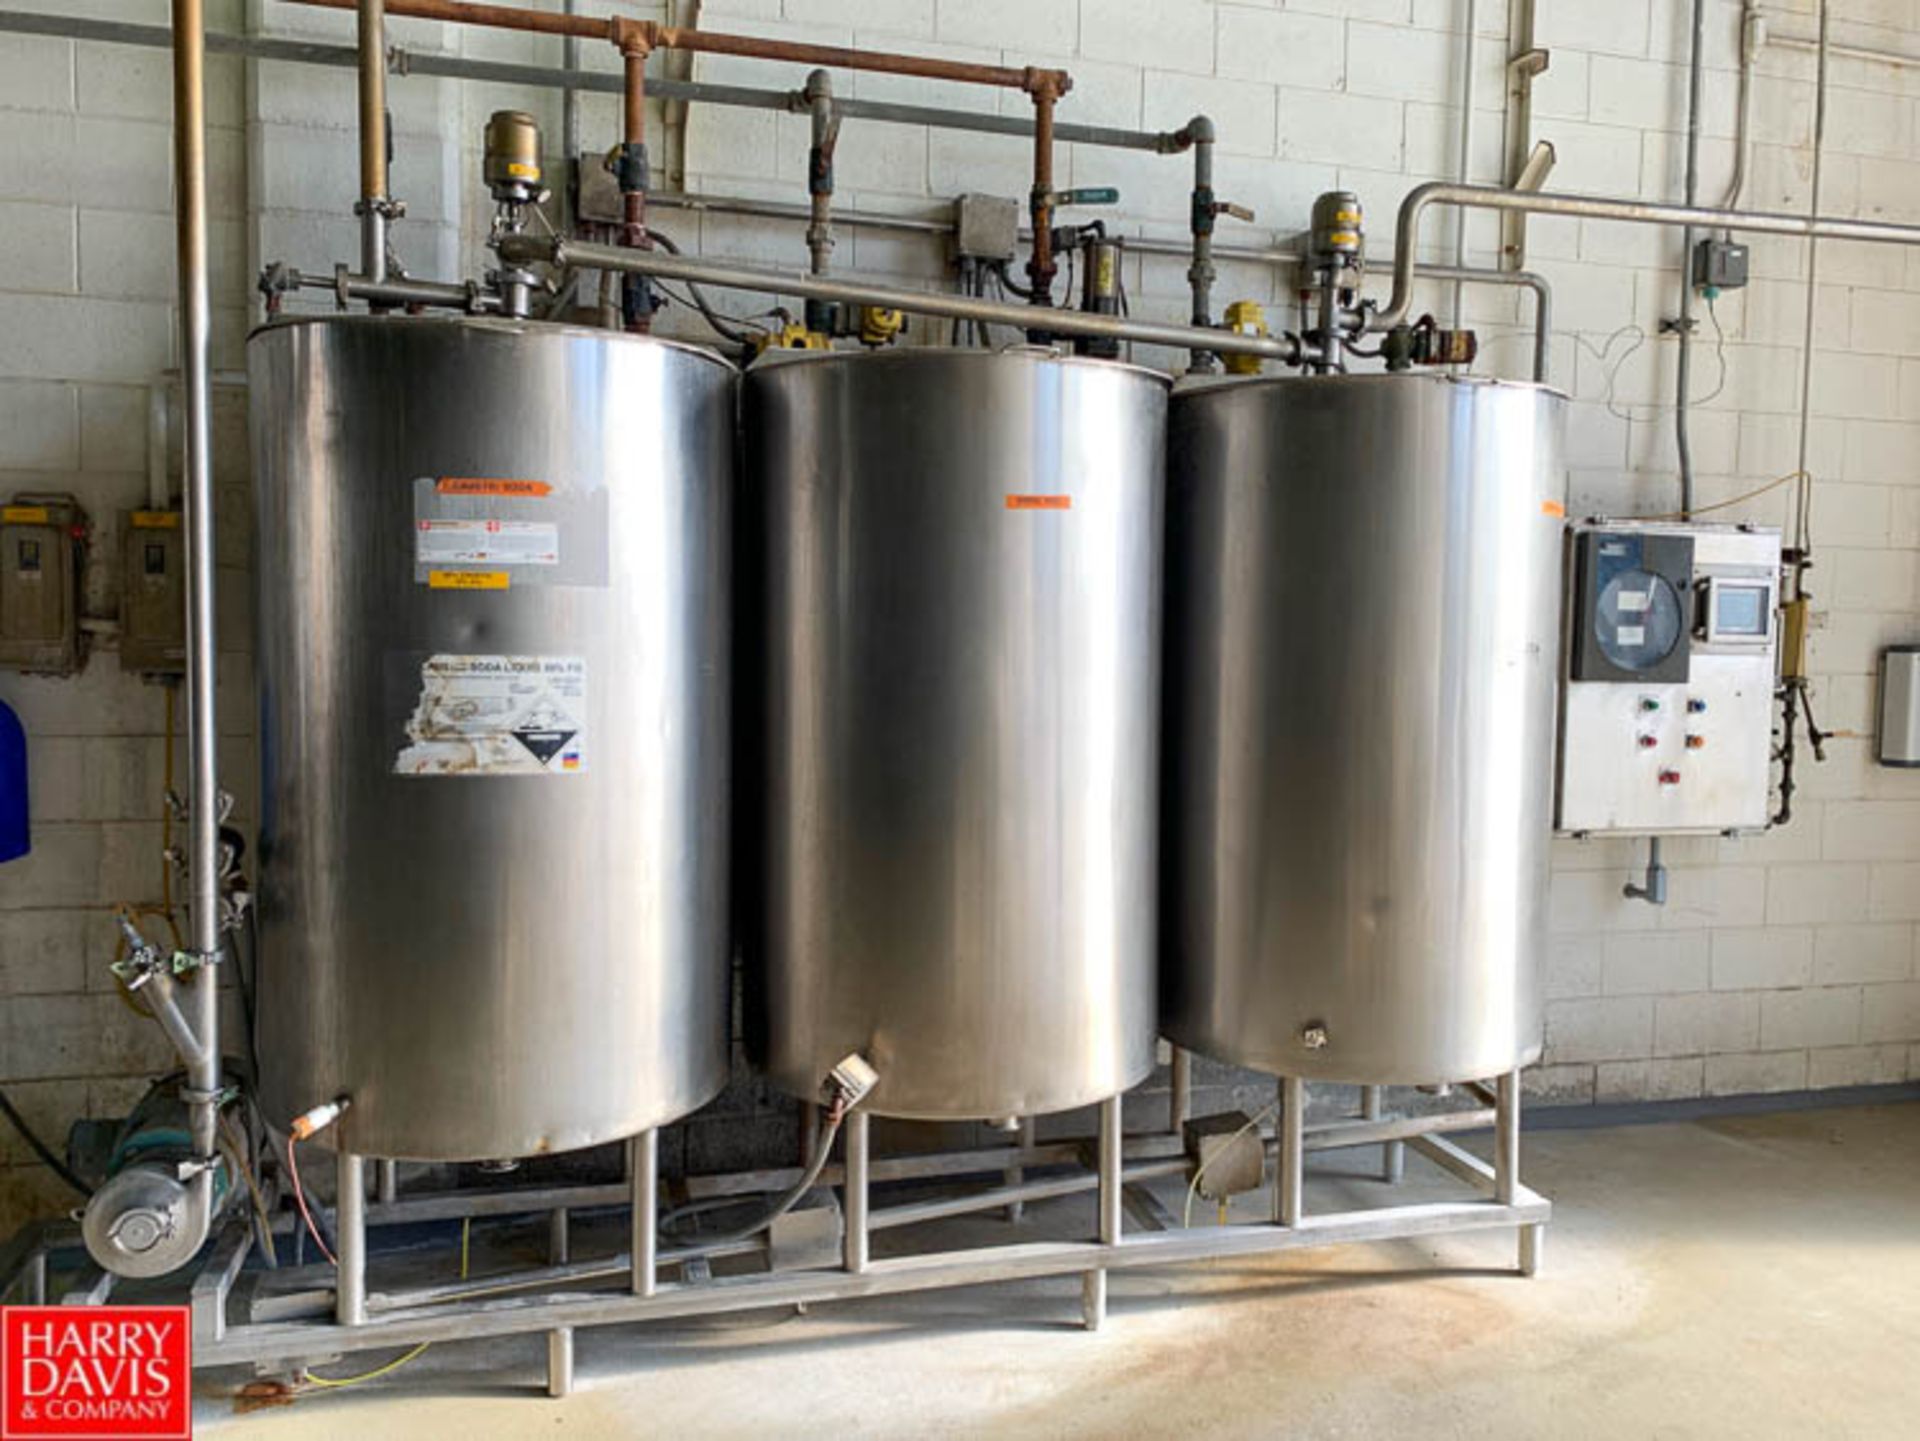 3-Tank Skid-Mounted CIP System with (3) 200 Gallon S/S Tanks, Tri Clover Centrifugal Pump, S/S Air